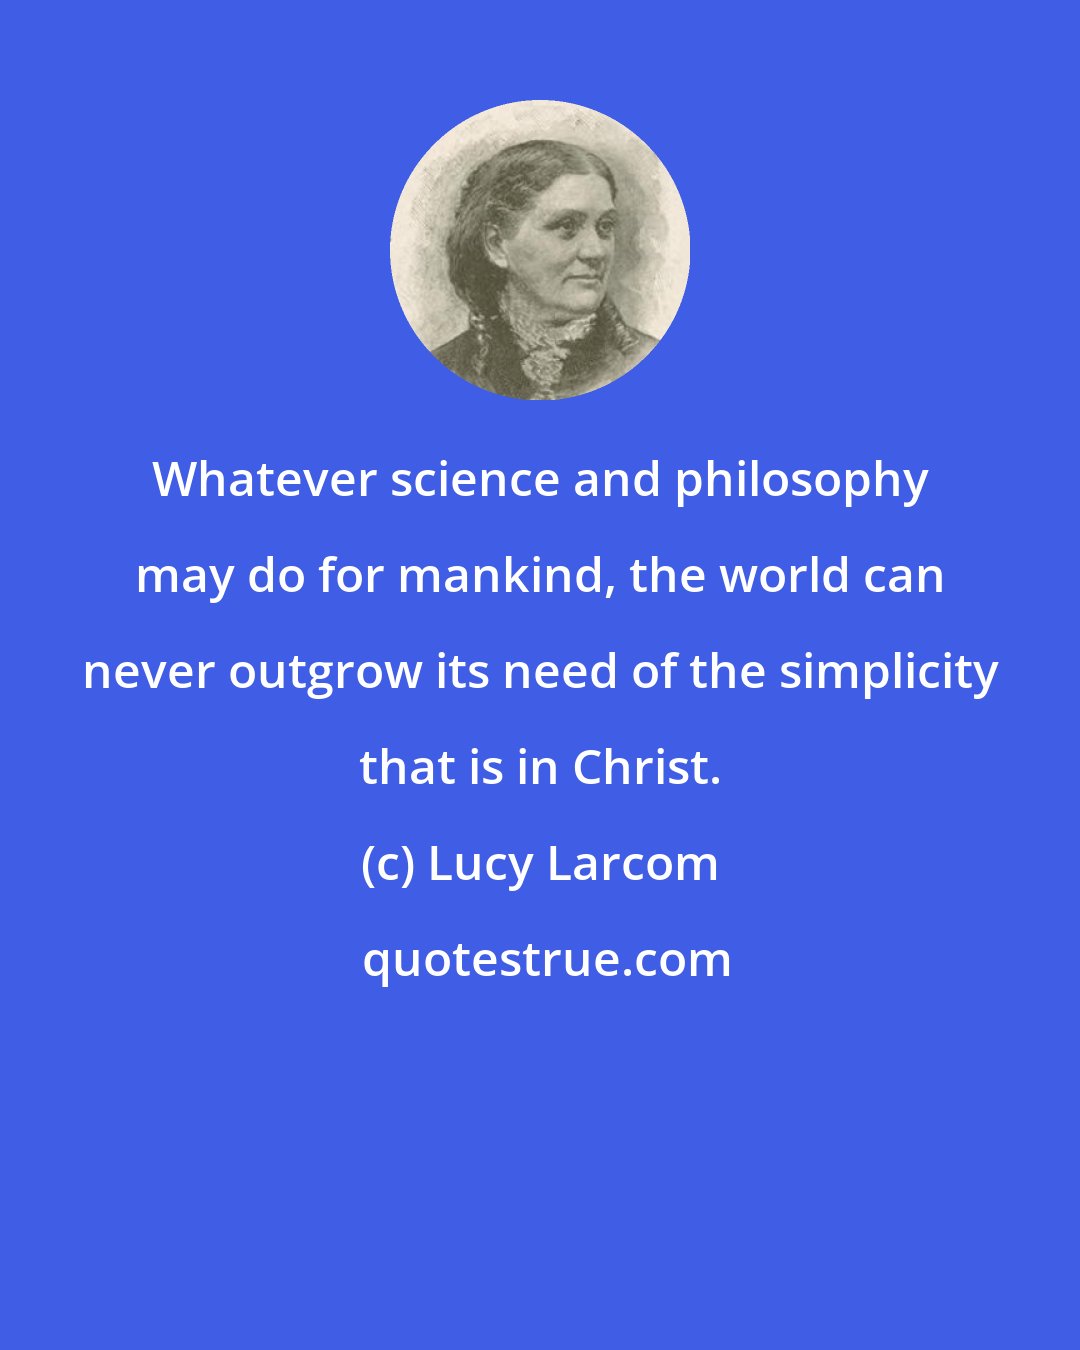 Lucy Larcom: Whatever science and philosophy may do for mankind, the world can never outgrow its need of the simplicity that is in Christ.